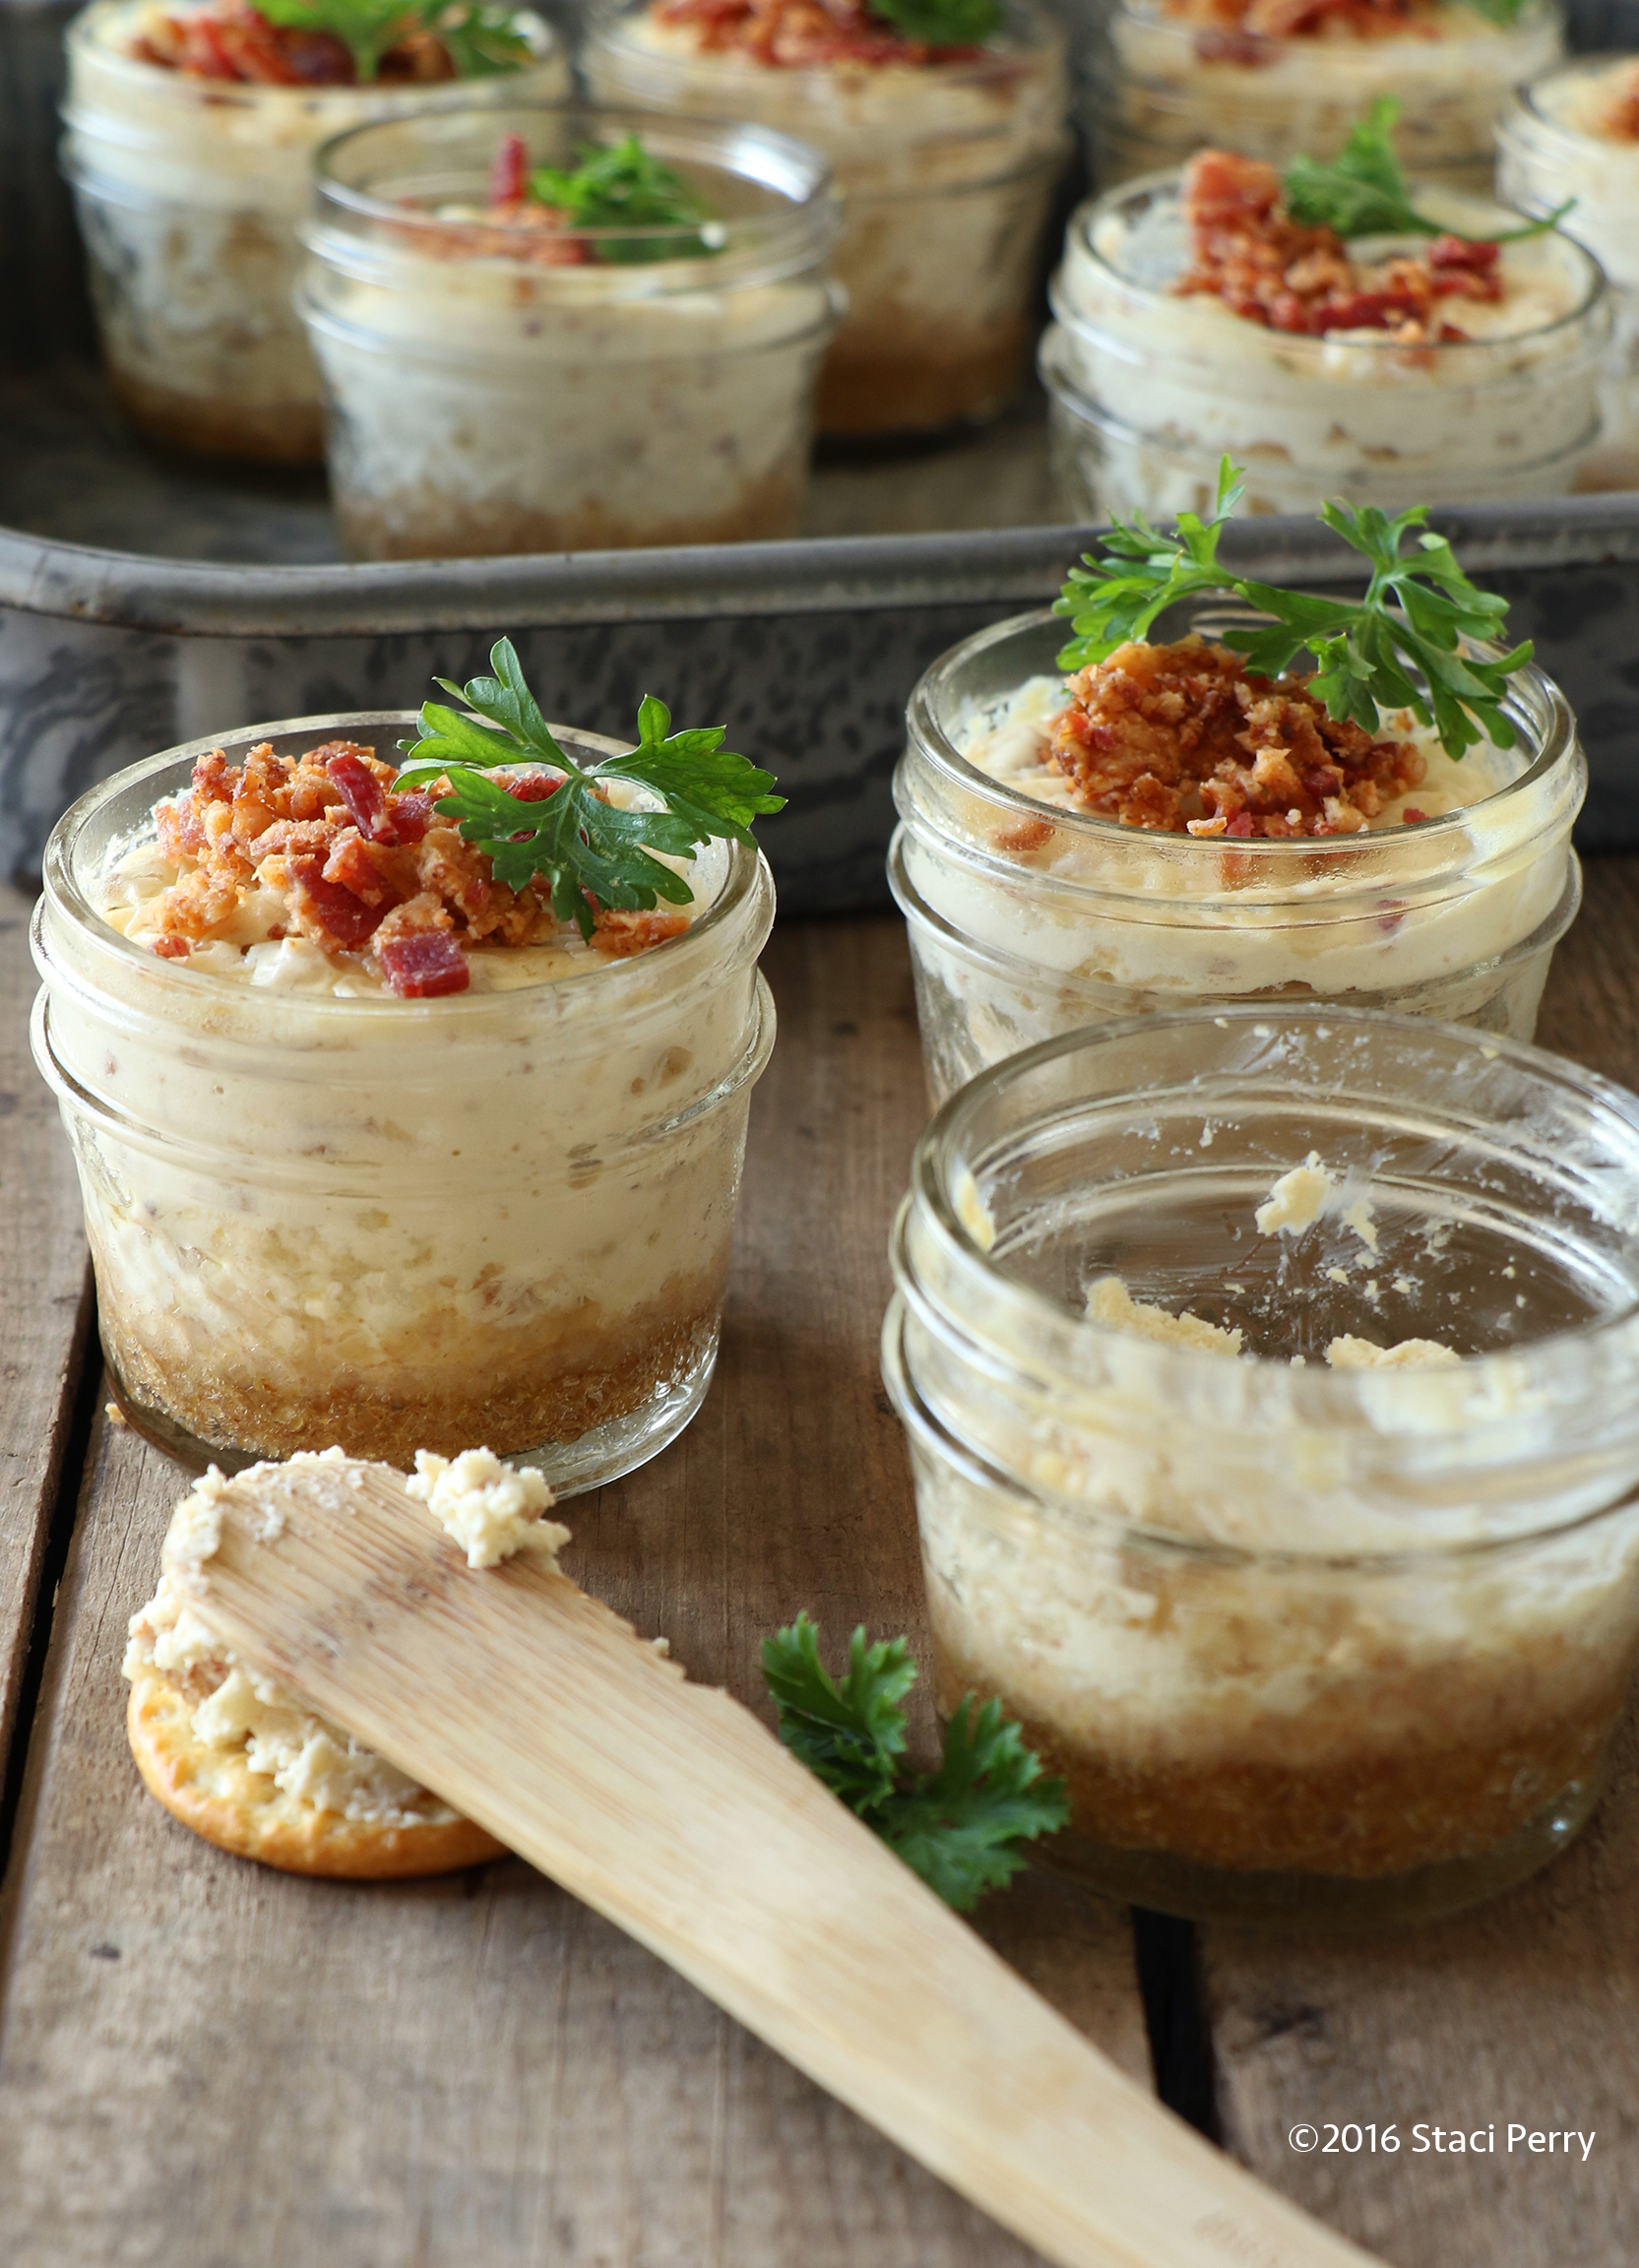 Party on with Pigskin Smoky Bacon Cheesecake with Gouda and Gruyere